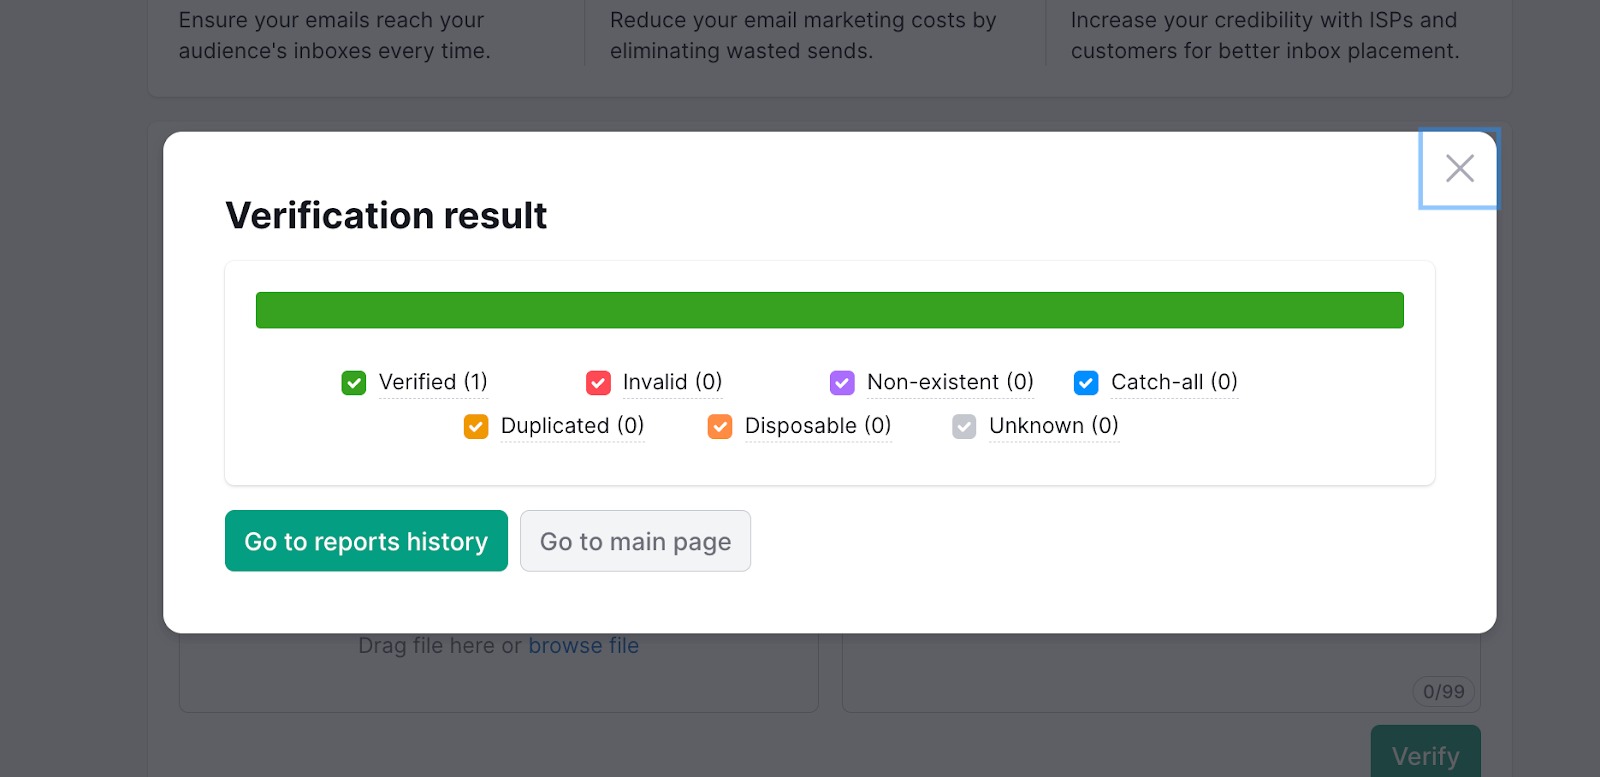 The Verification result window has two buttons to choose from, “Go to reports history,” which will give you a deeper breakdown of the results, or “Go to main page” to return to the home page. 